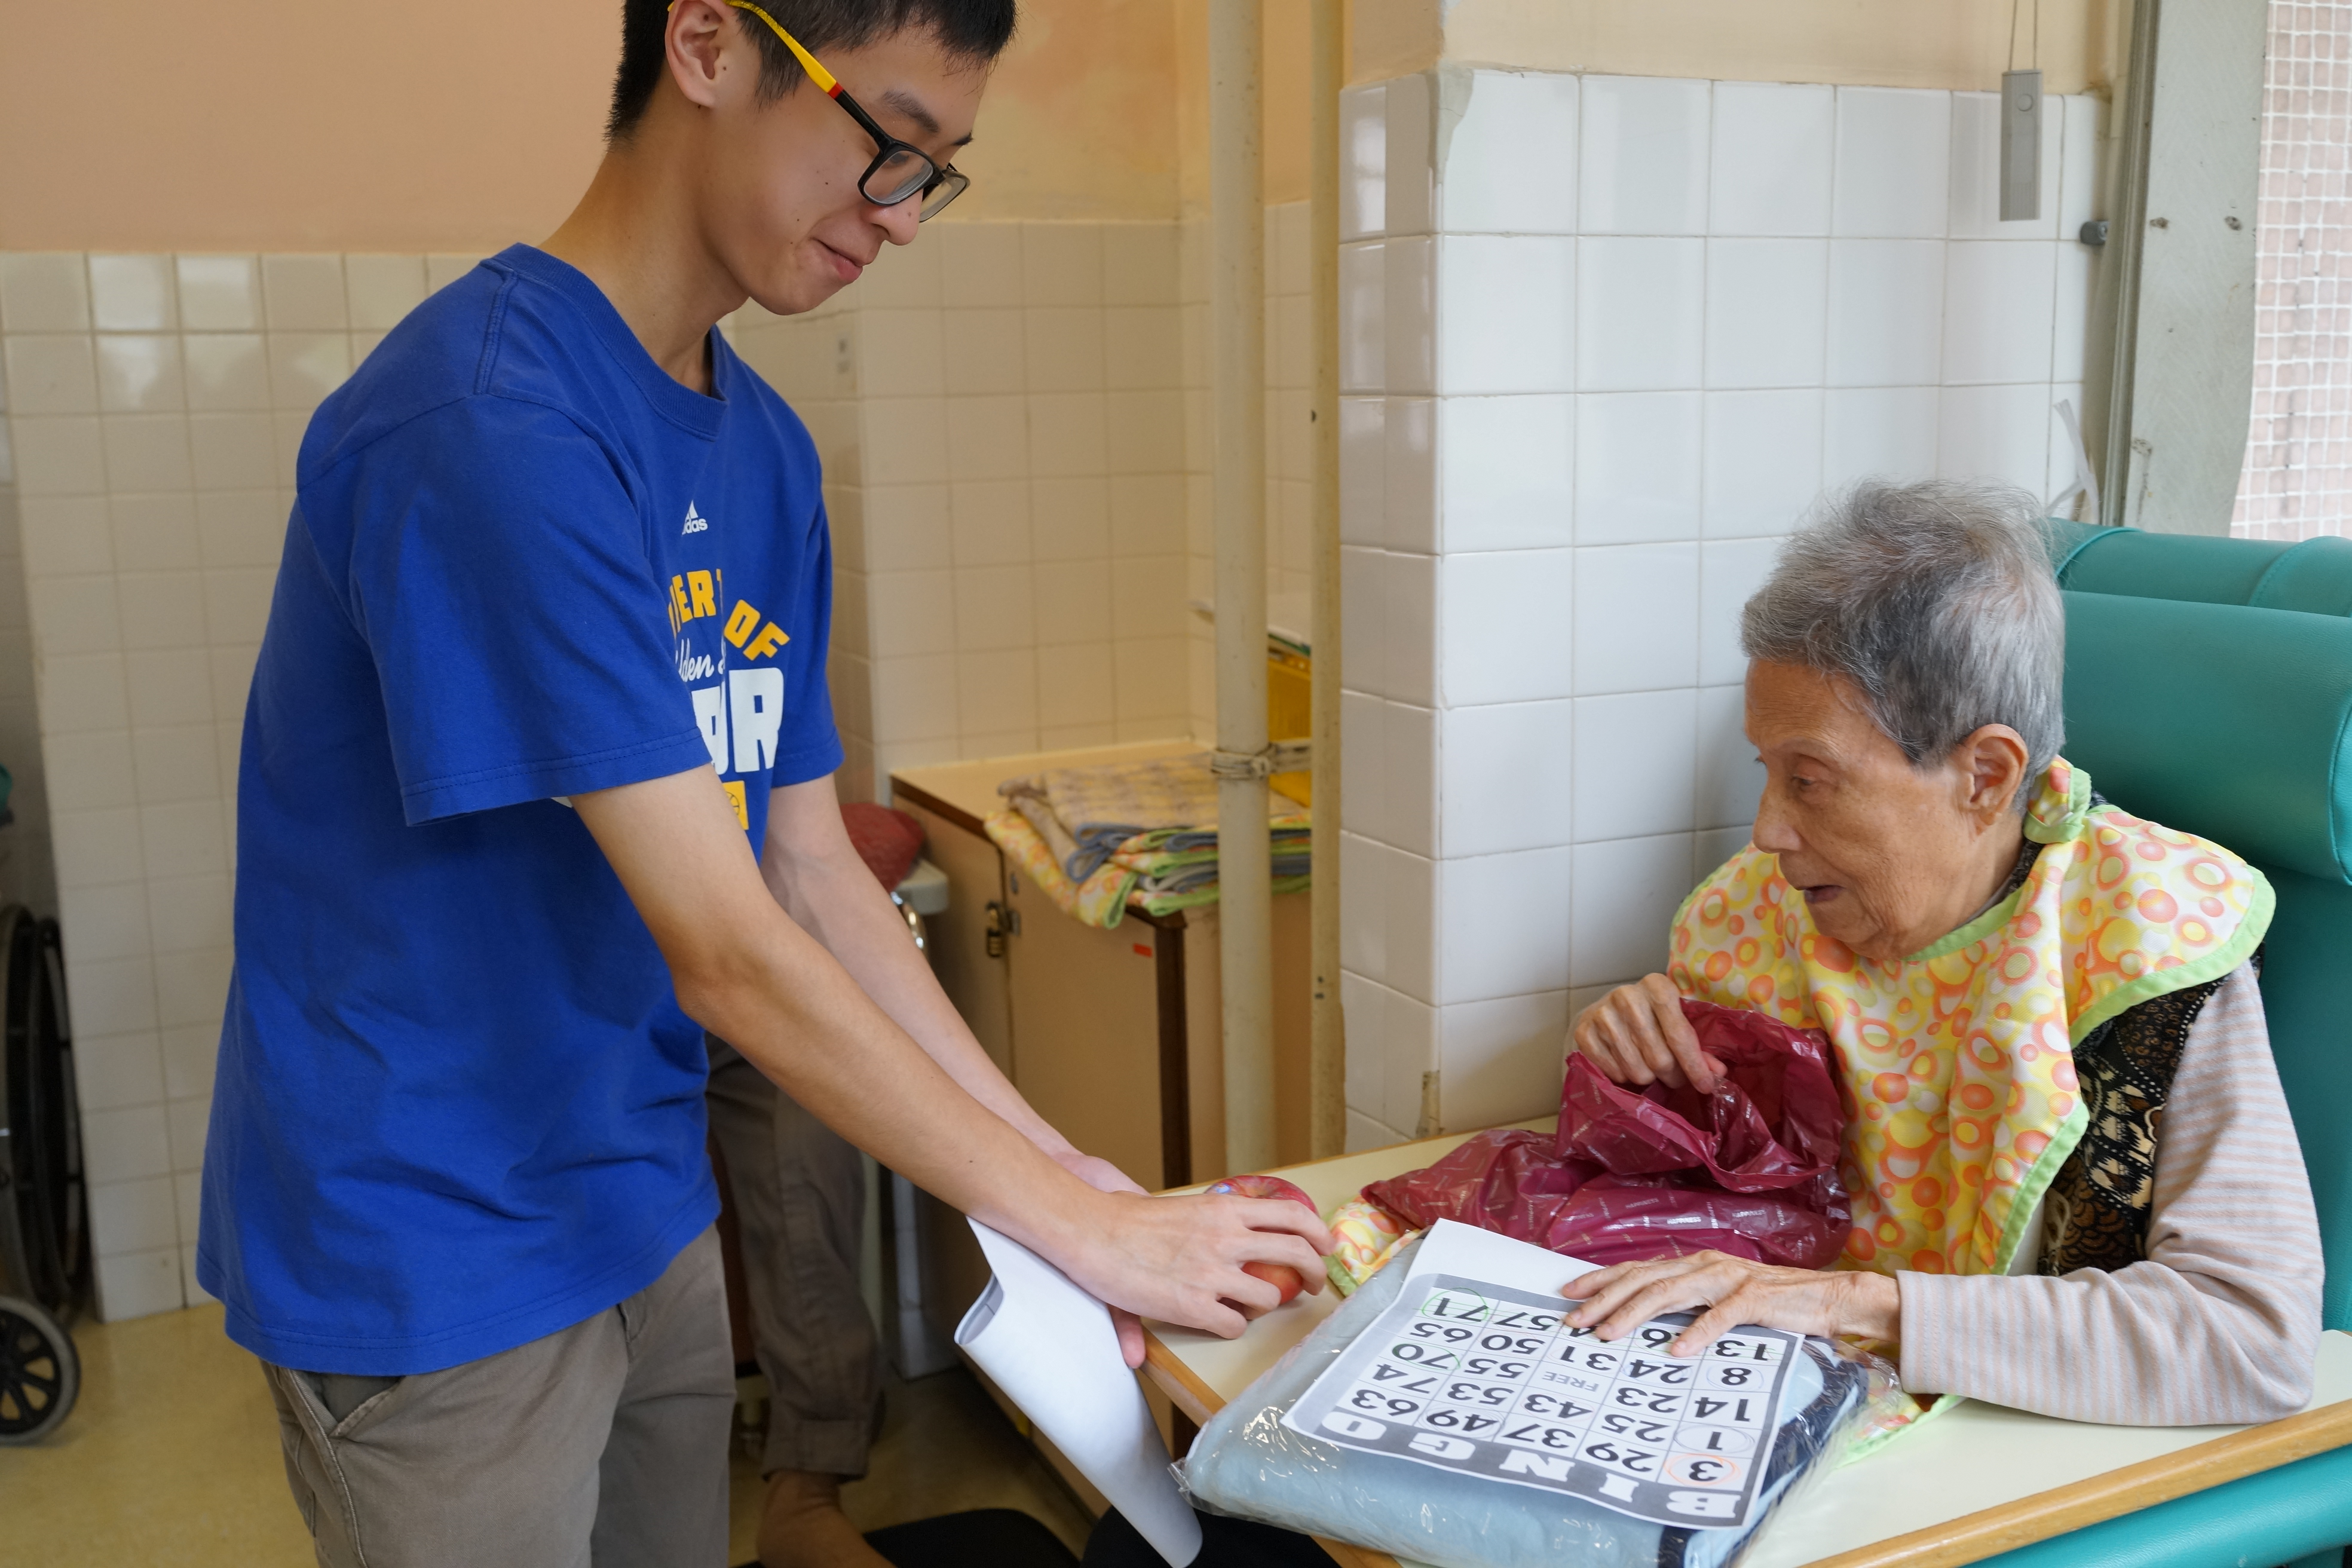 An afternoon serving the elderly: a visit to the Po Leung Kuk Wong Chuk Hang Service for the Elderly - Photo - 5